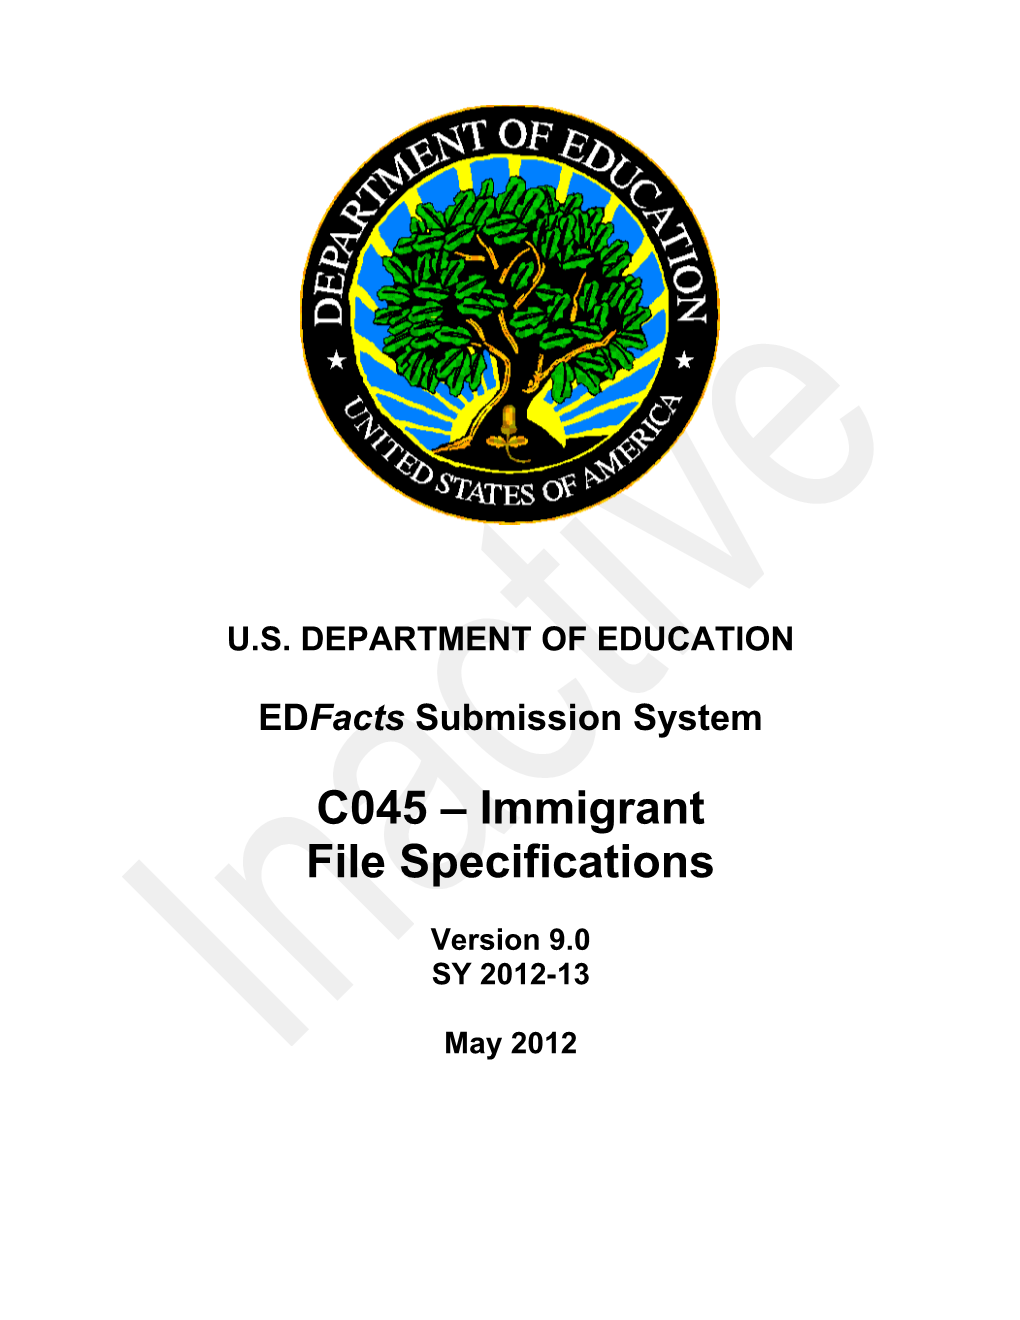 Immigrant File Specifications